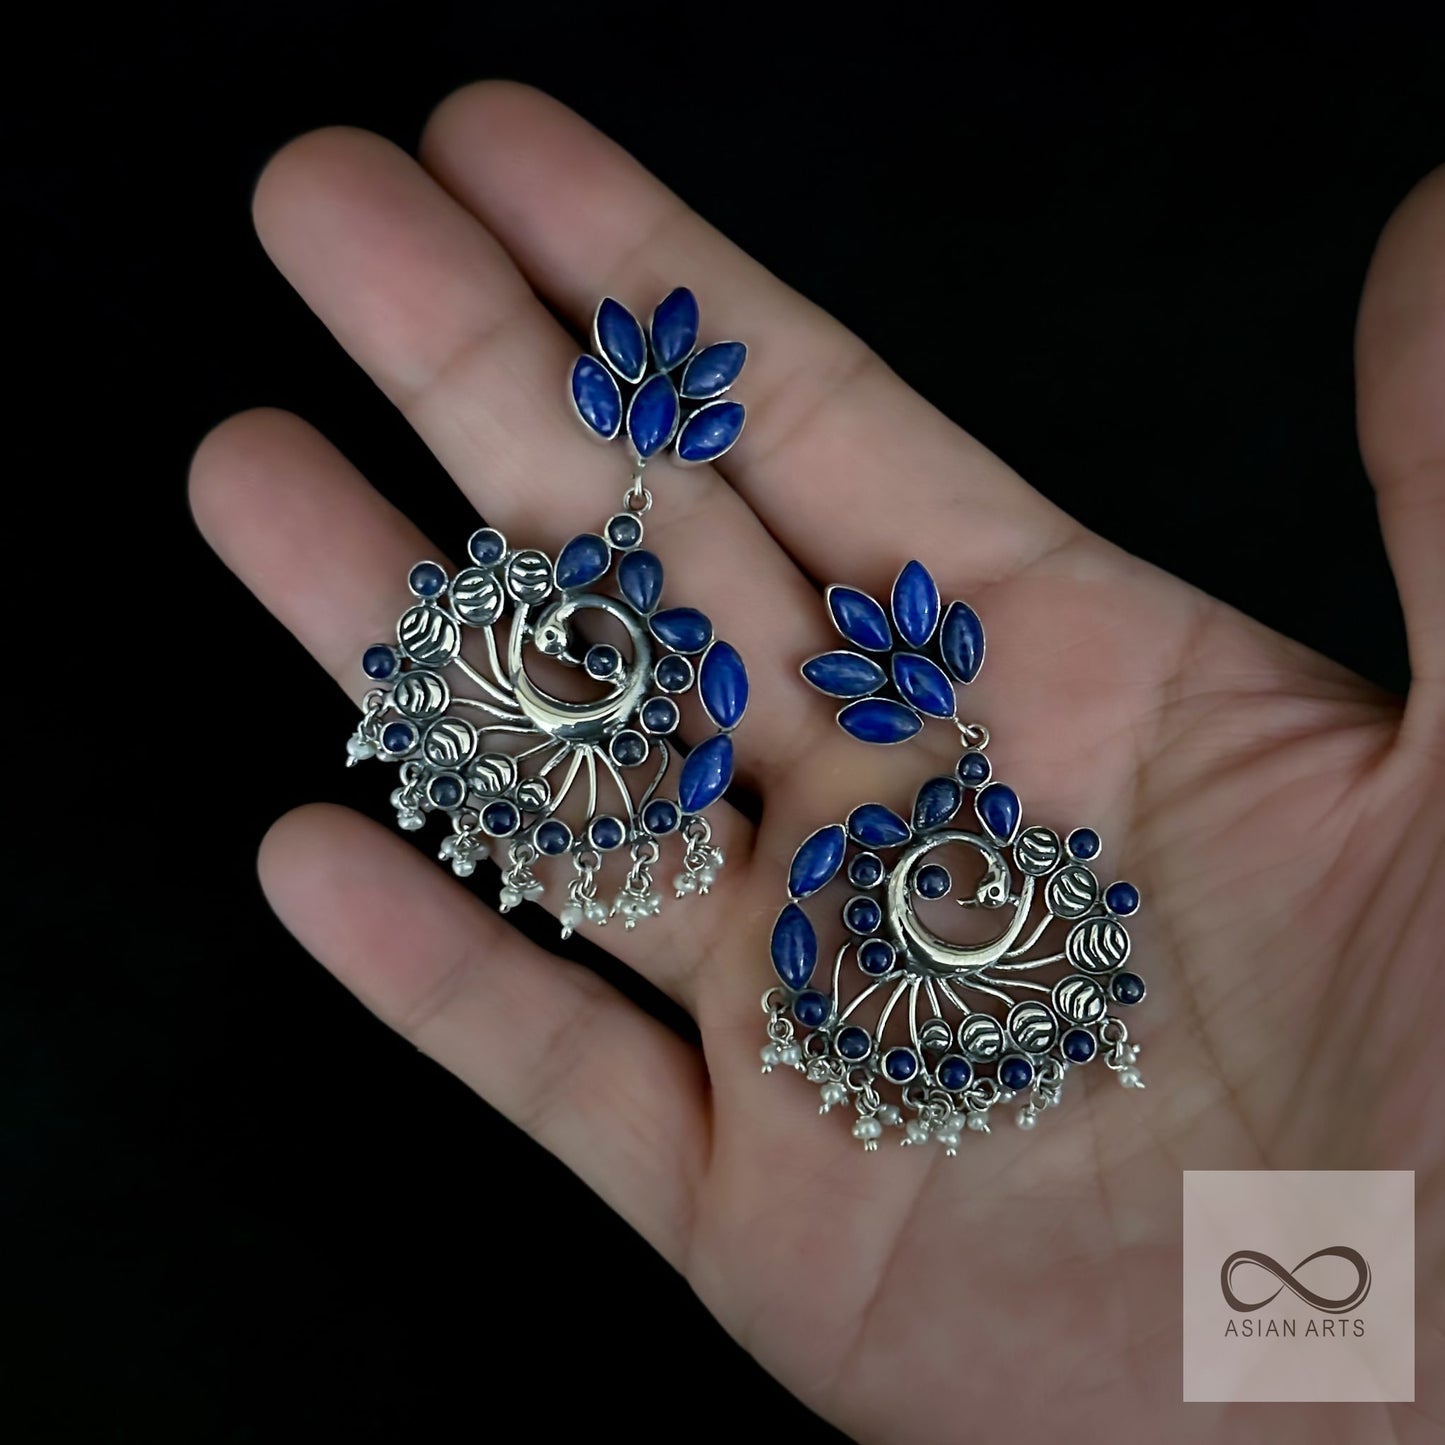 Quirky peacock earrings with stone